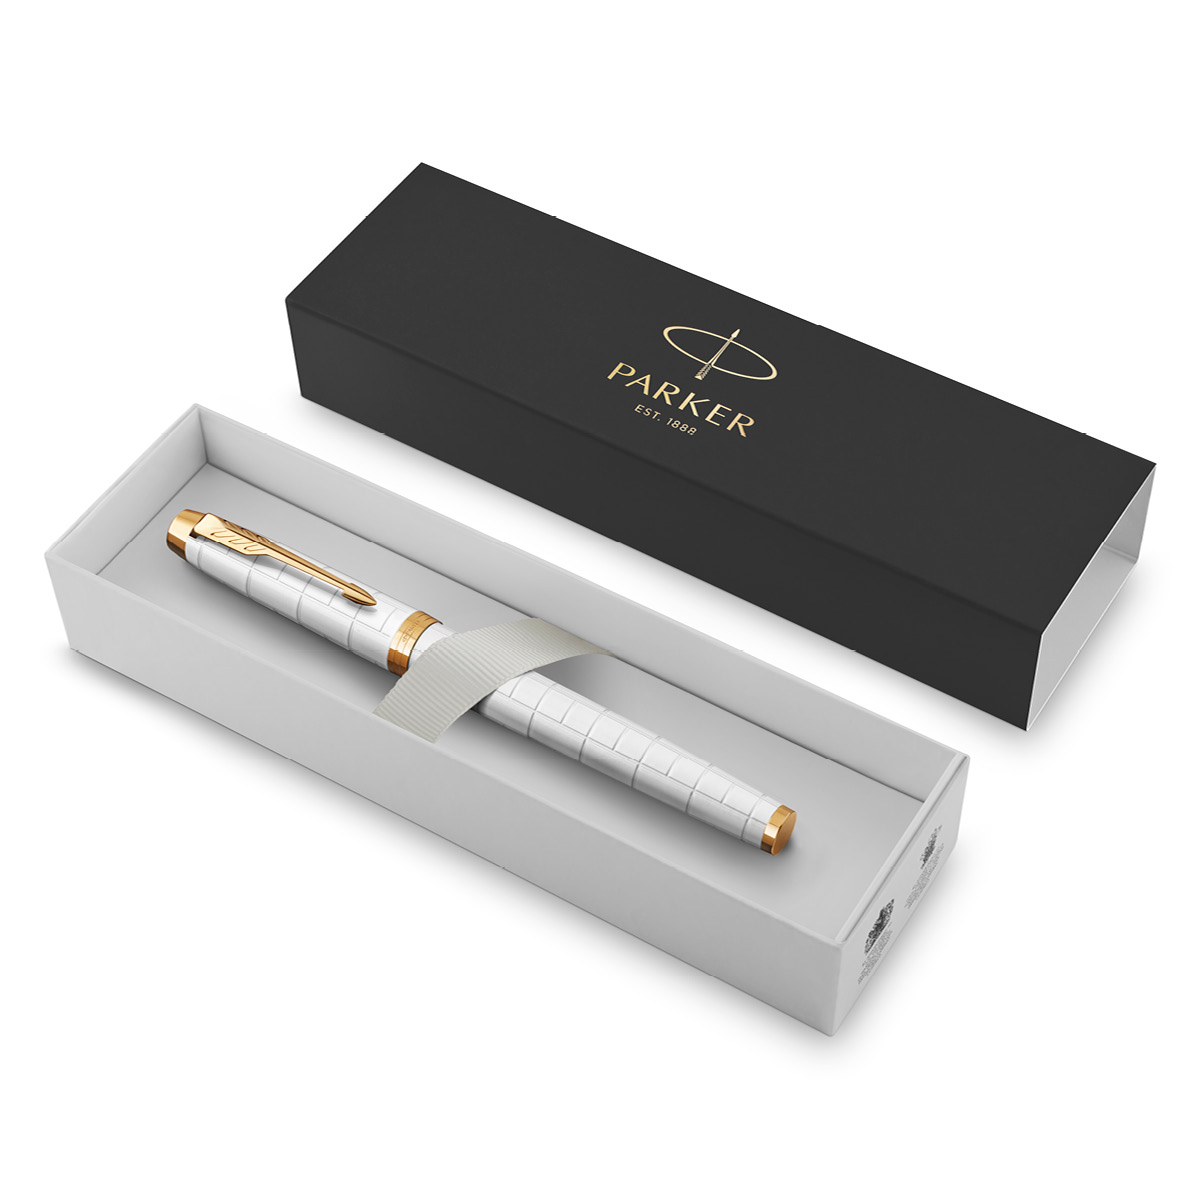 IM Premium Pearl/Gold Rollerball in the group Pens / Fine Writing / Rollerball Pens at Pen Store (112689)